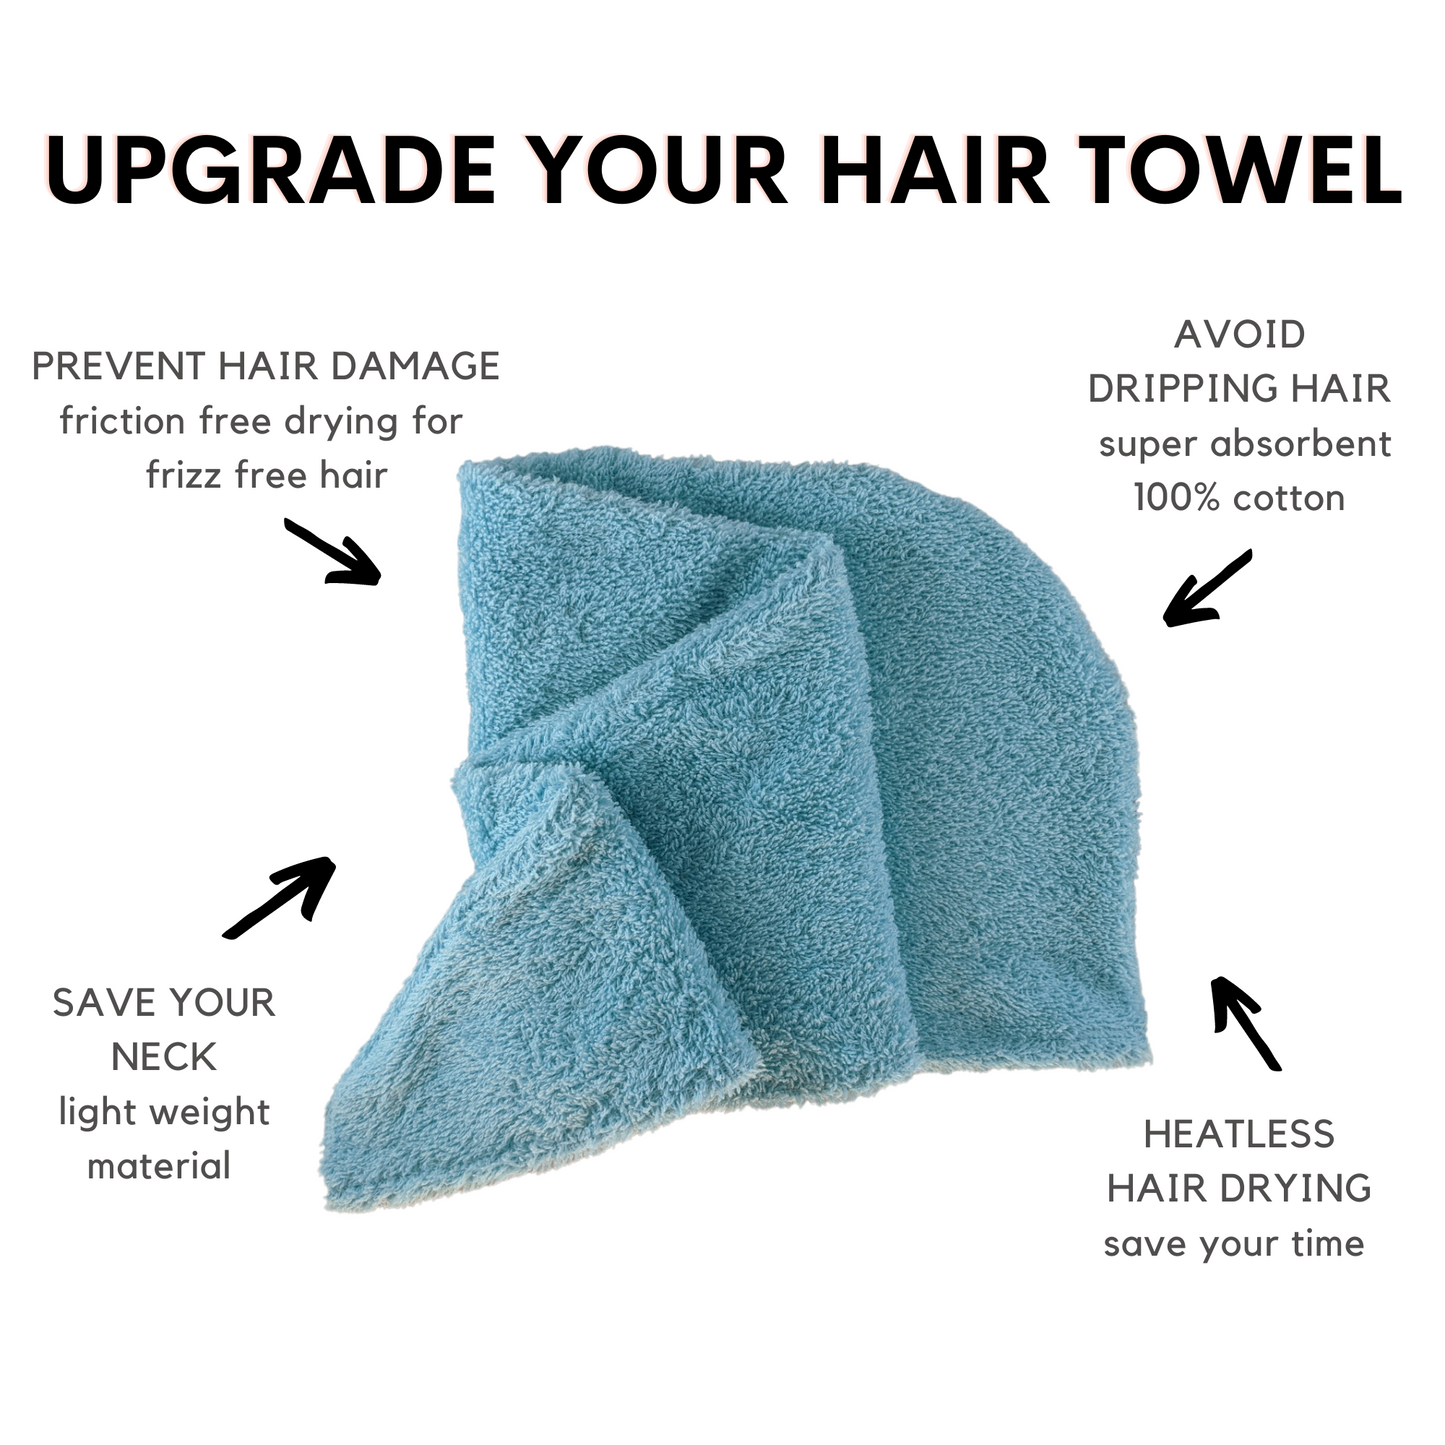 upgrade your hair towel handmade in canada arctic rose heatless hair drying to save your hair and prevent hair damage from blowdrying